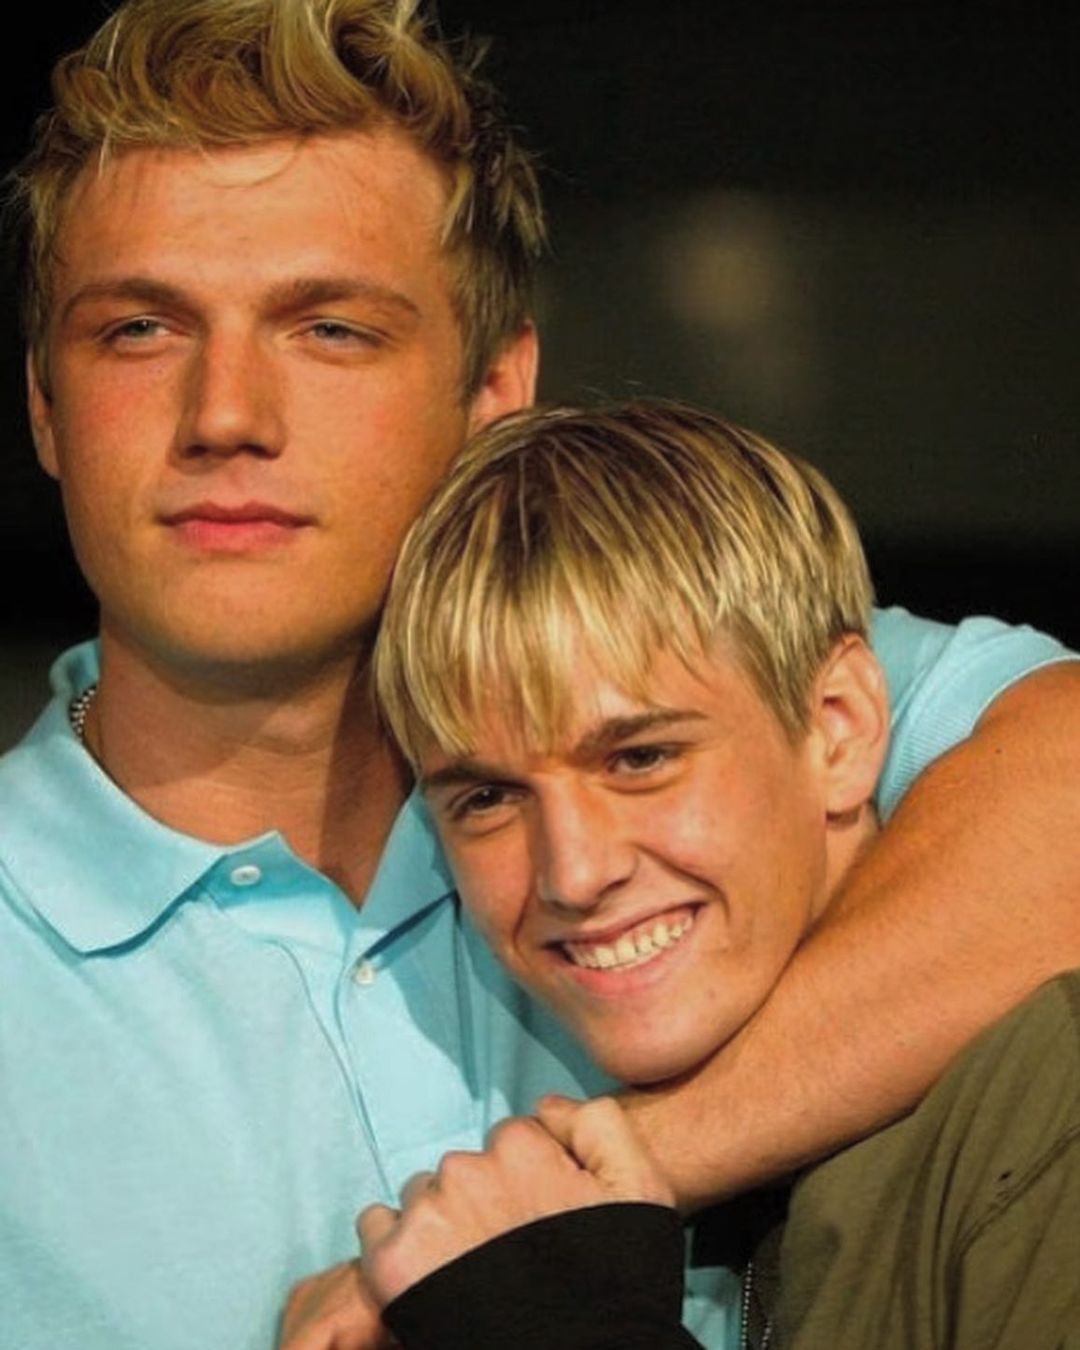 Nick Carter and his late brother, Aaron Carter, had a complicated relationship.